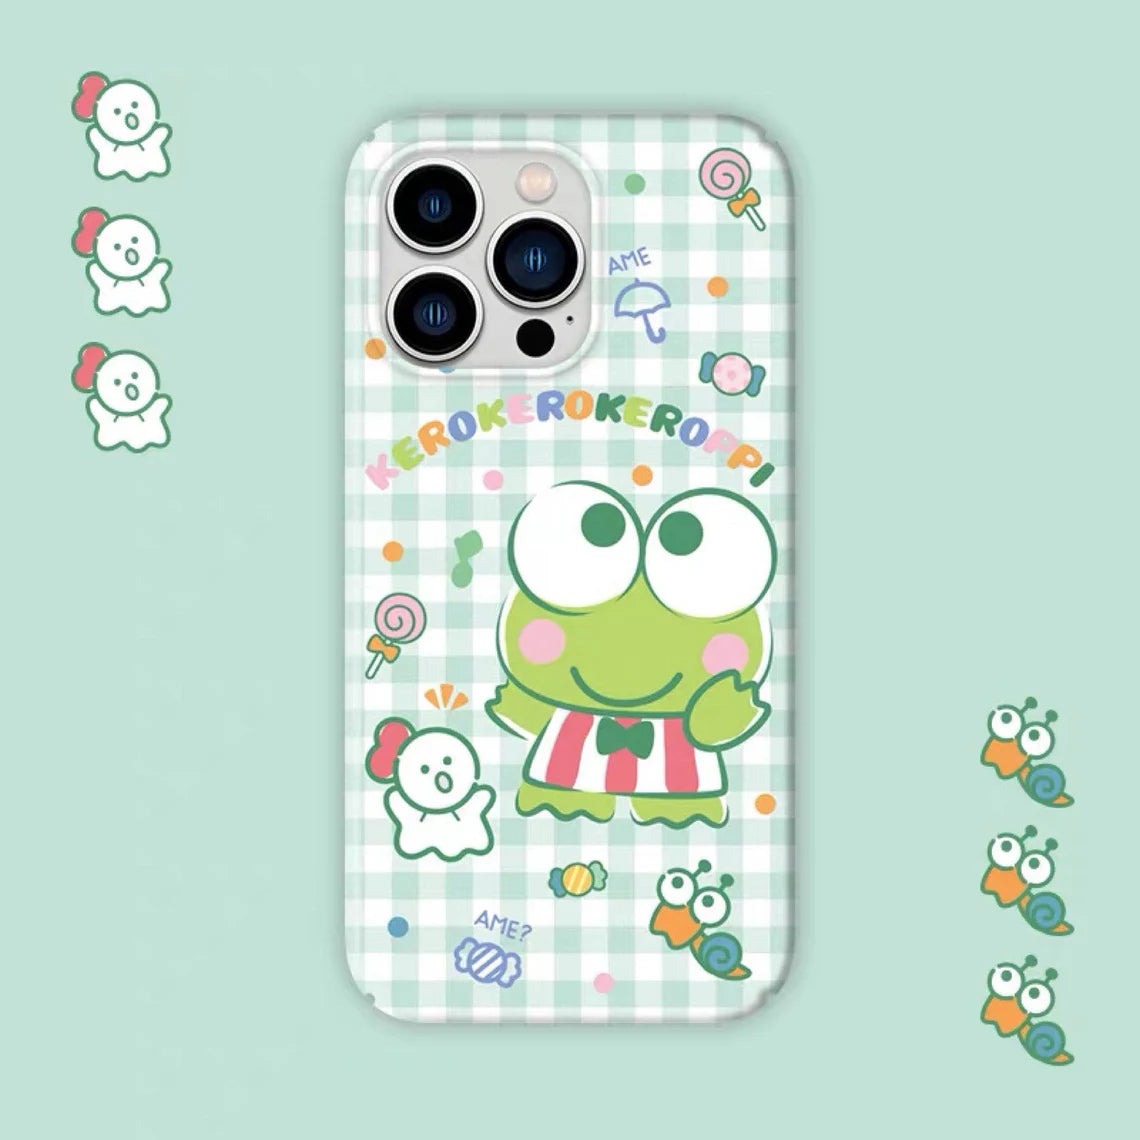 Japanese Cartoon Keroppi with friends Green iPhone Case PLUS XS XR X 11 12 13 14 15 Pro Promax